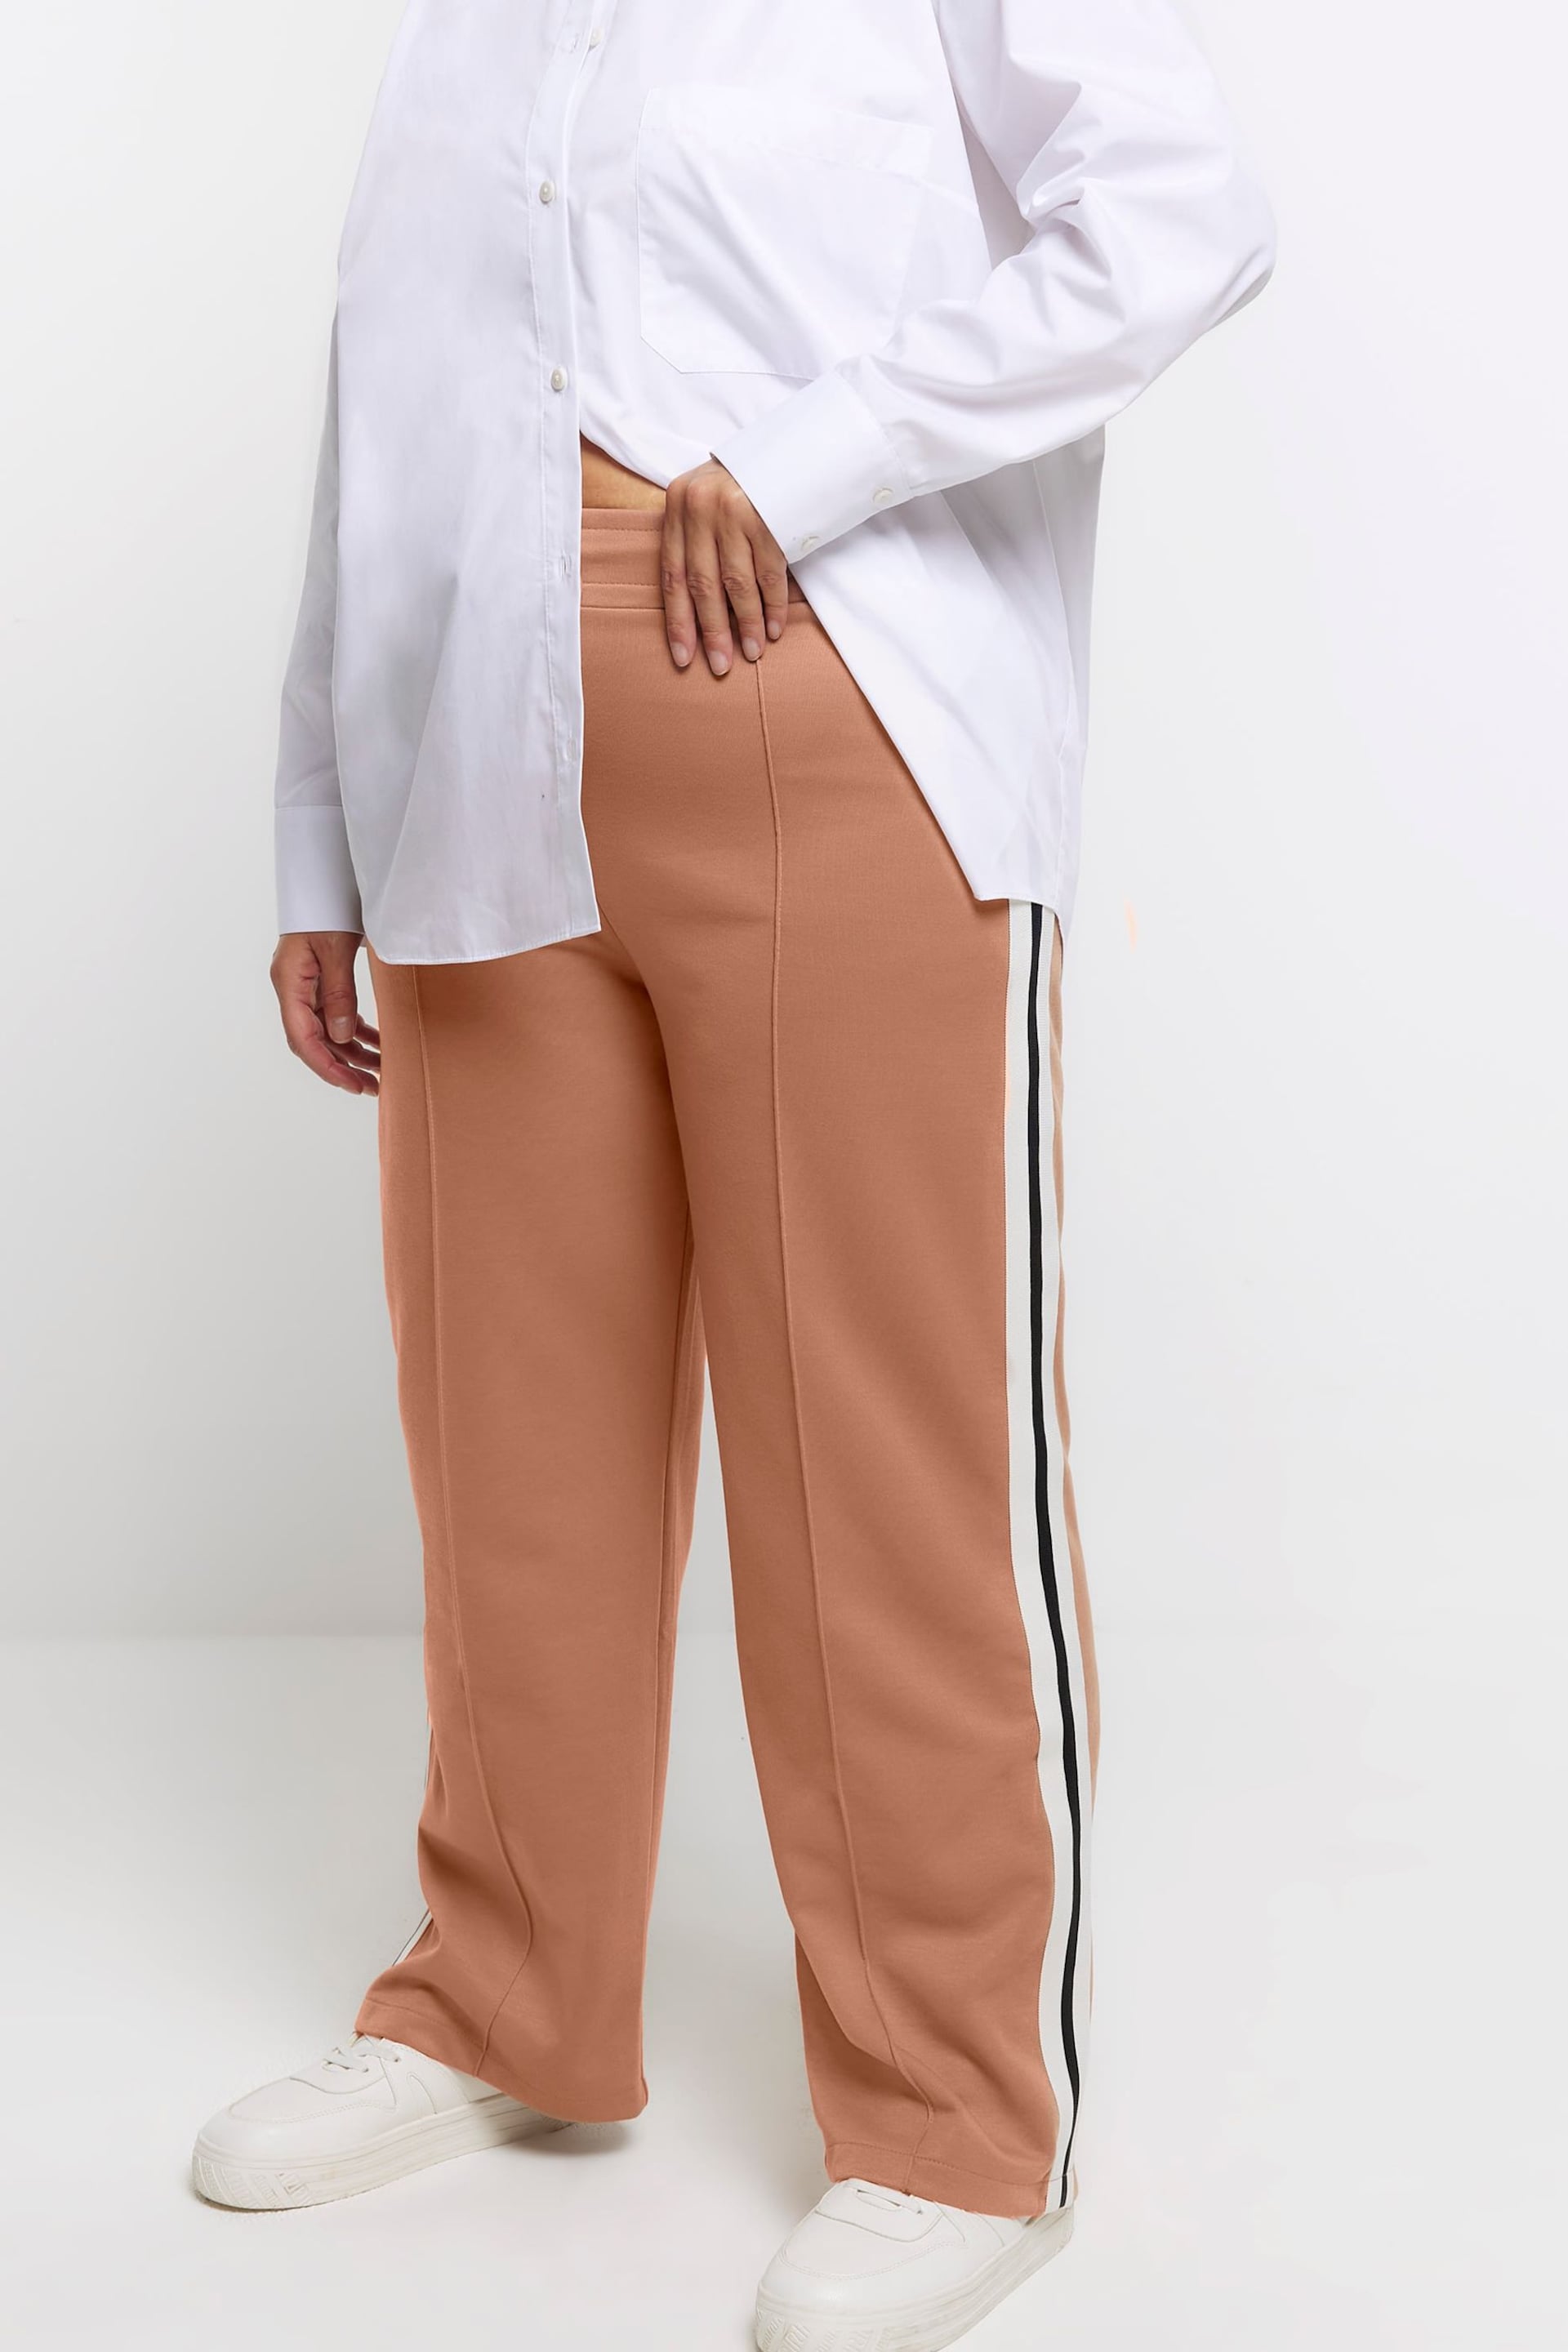 River Island Brown Curve Wide Leg Side Stripe Joggers - Image 1 of 4